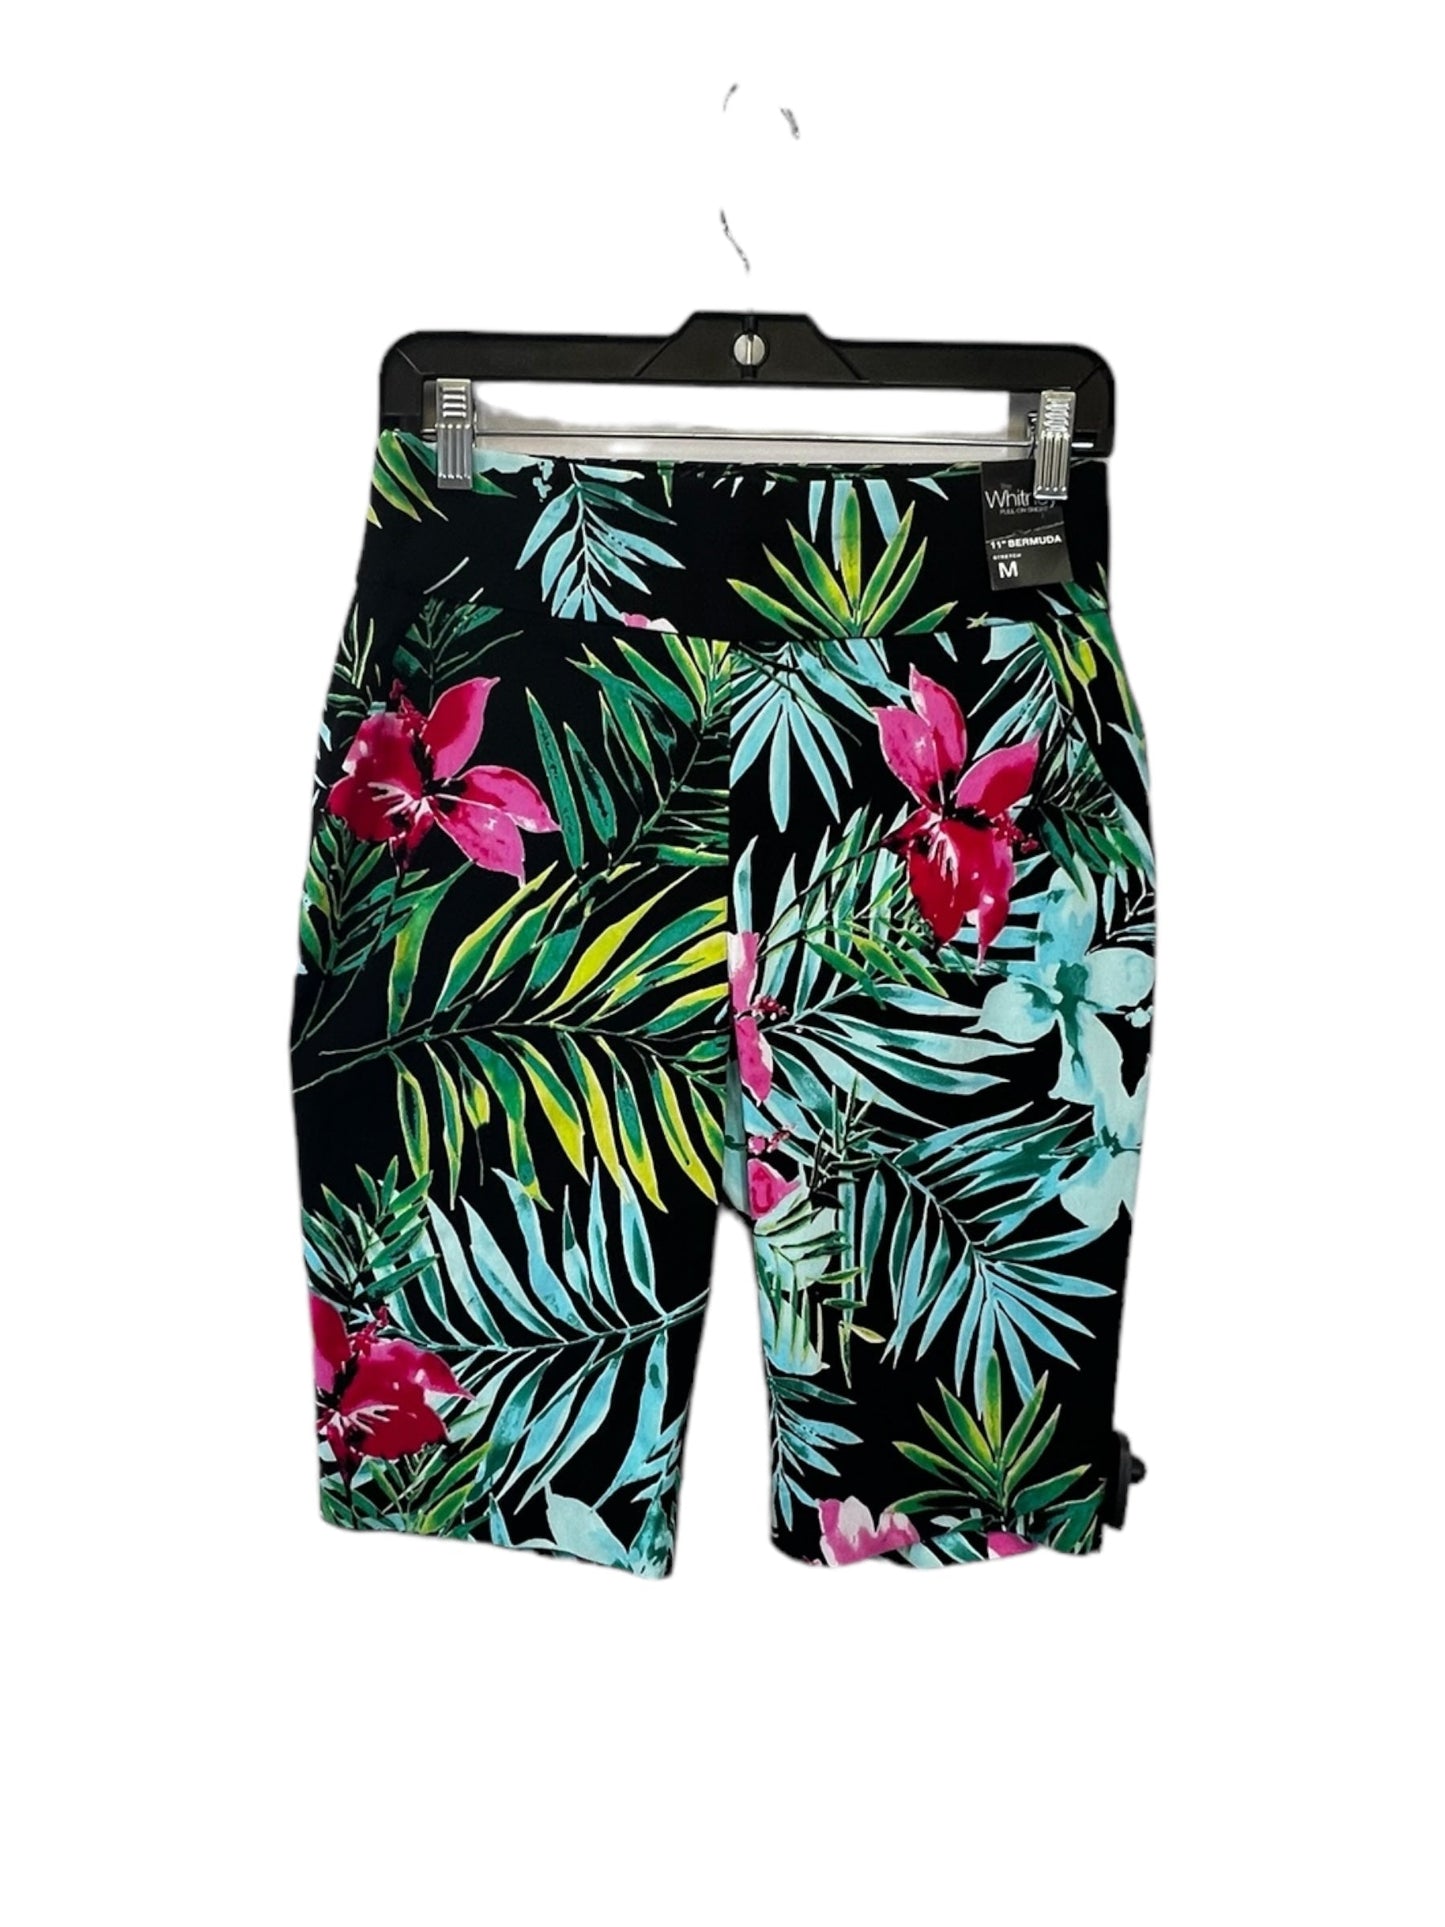 Tropical Print Shorts New York And Co, Size M